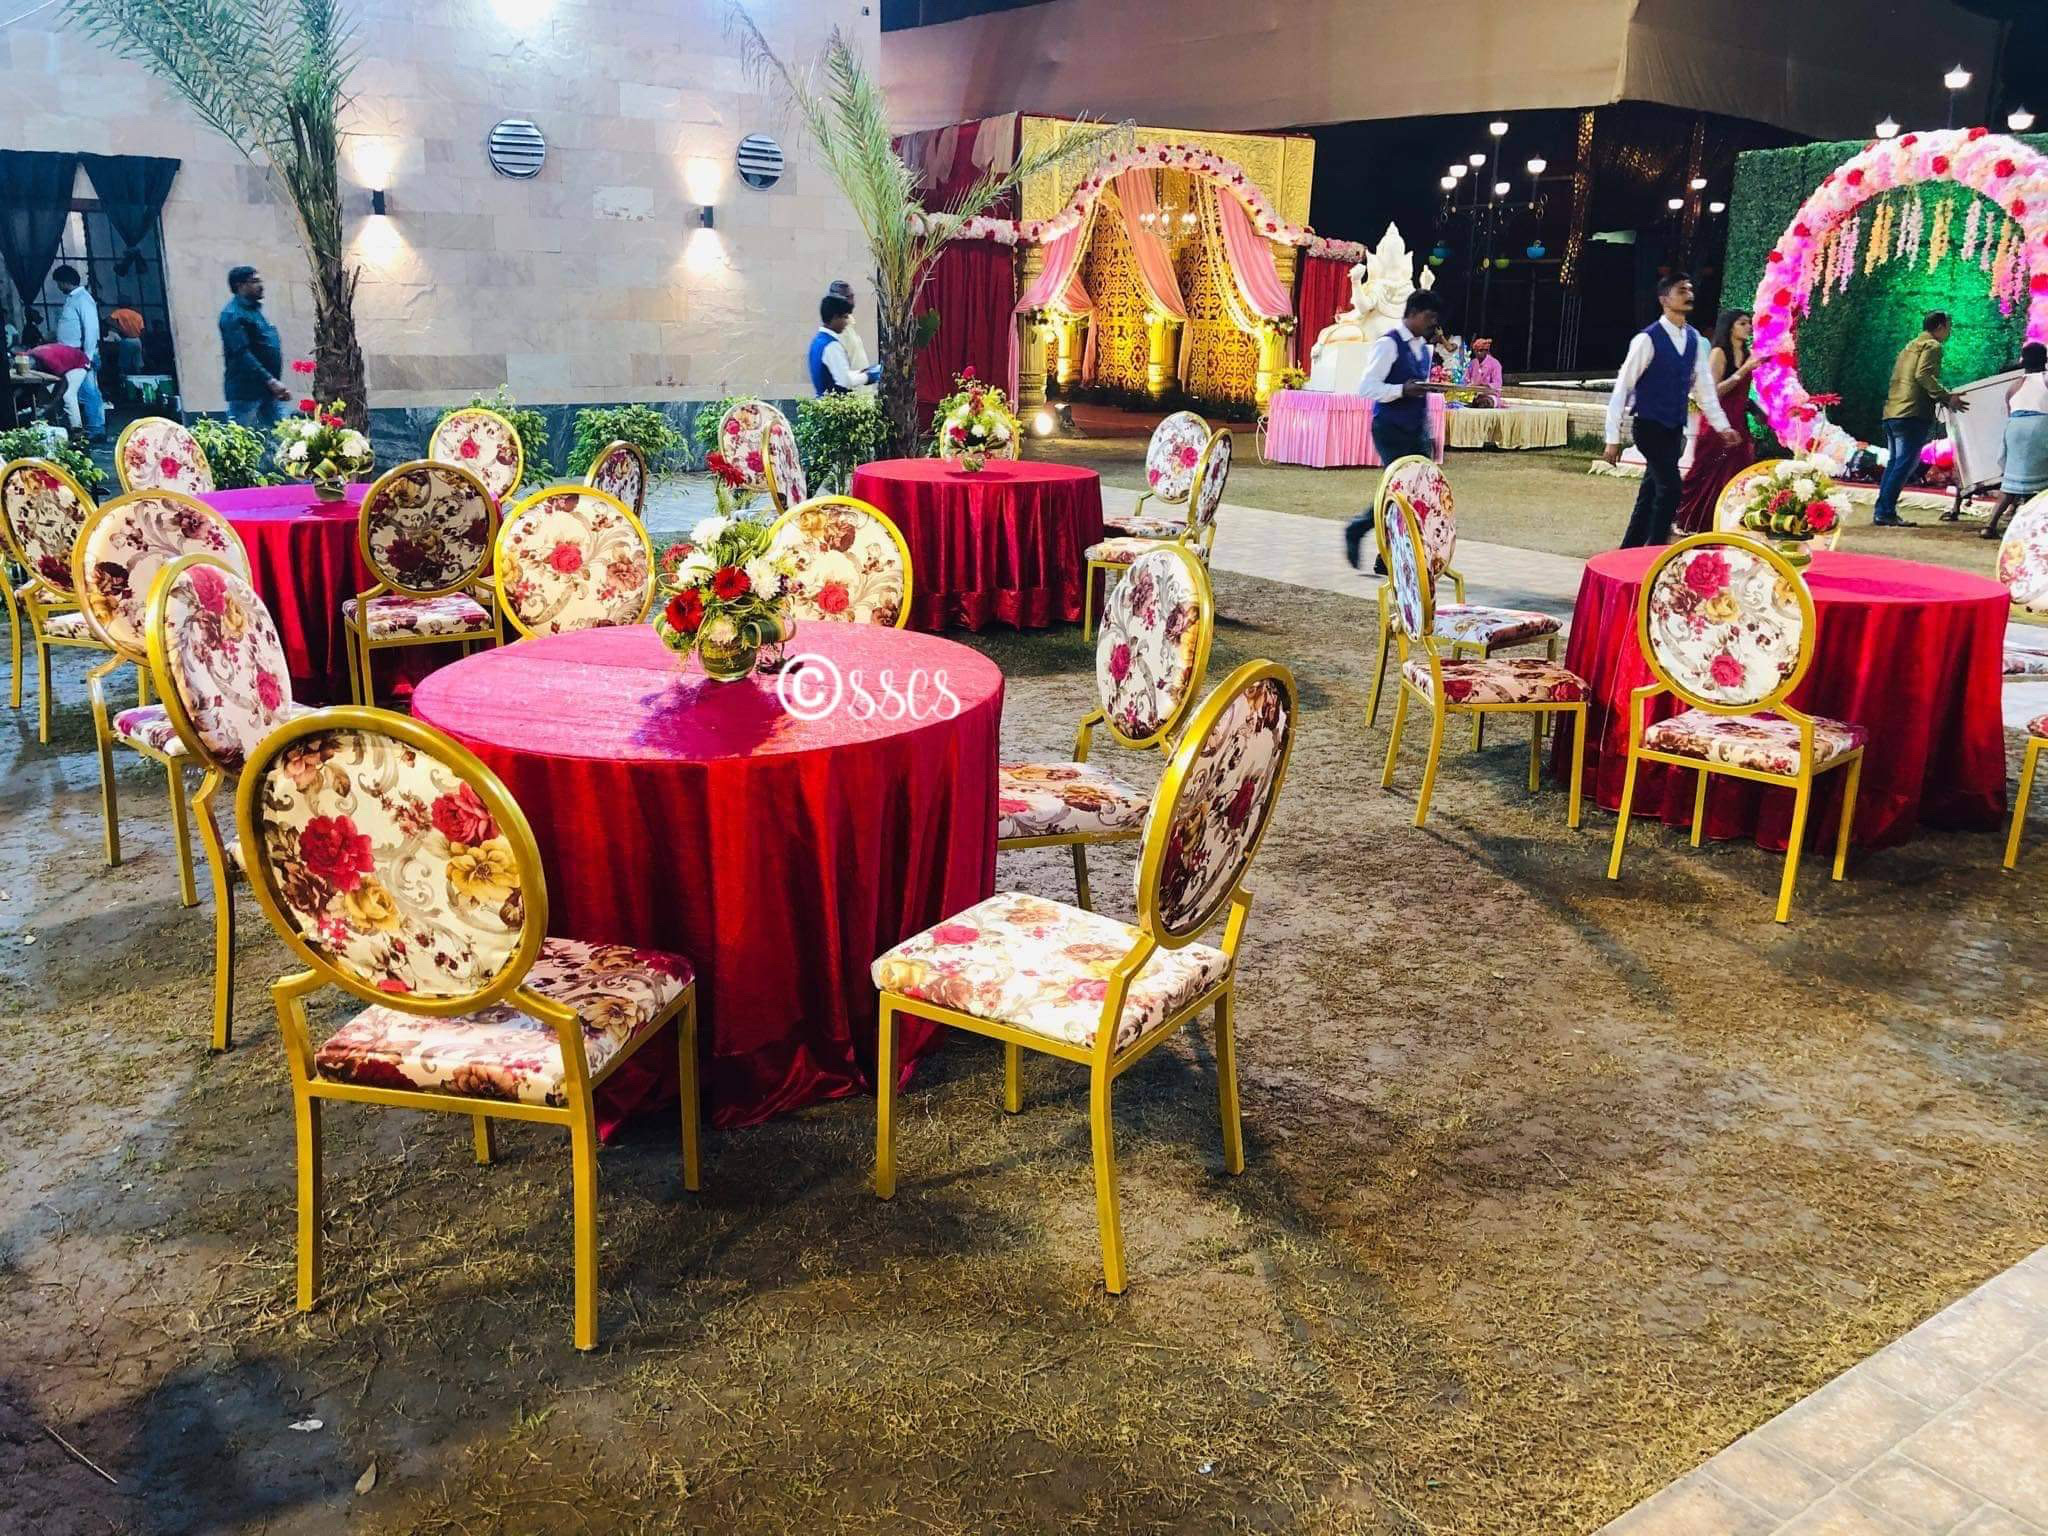 Wedding catering services